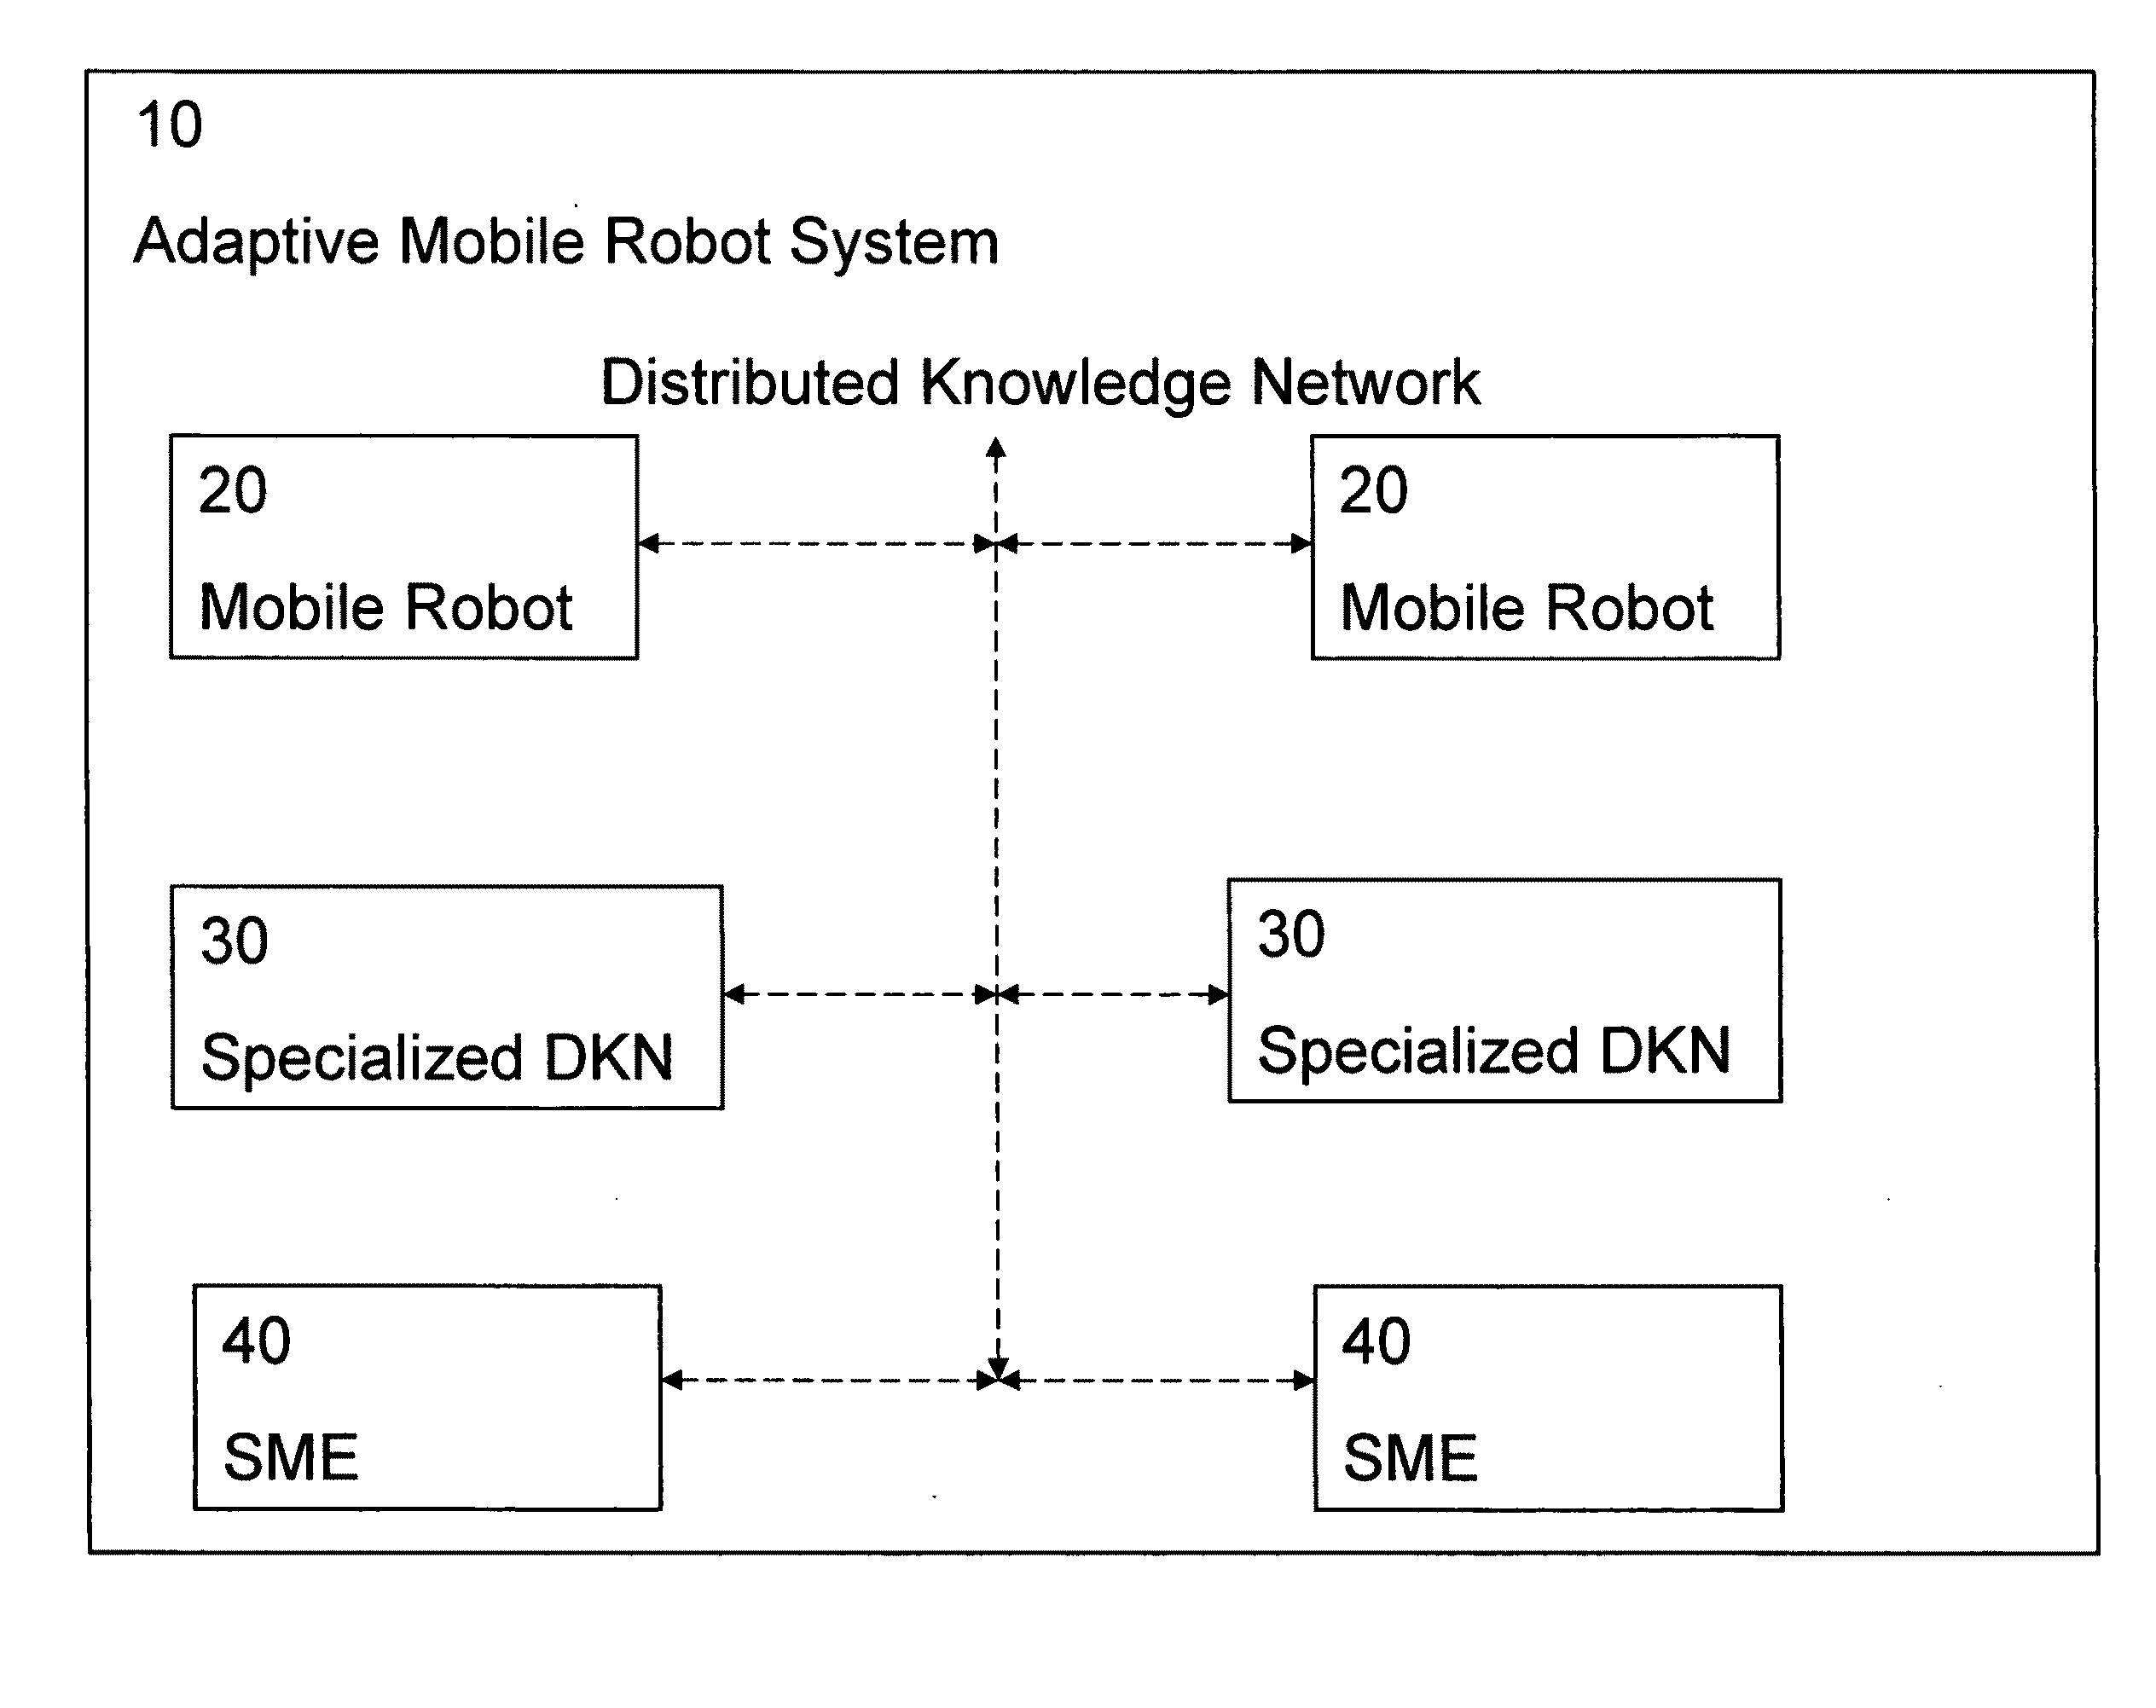 Adaptive Mobile Robot System with Knowledge-Driven Architecture